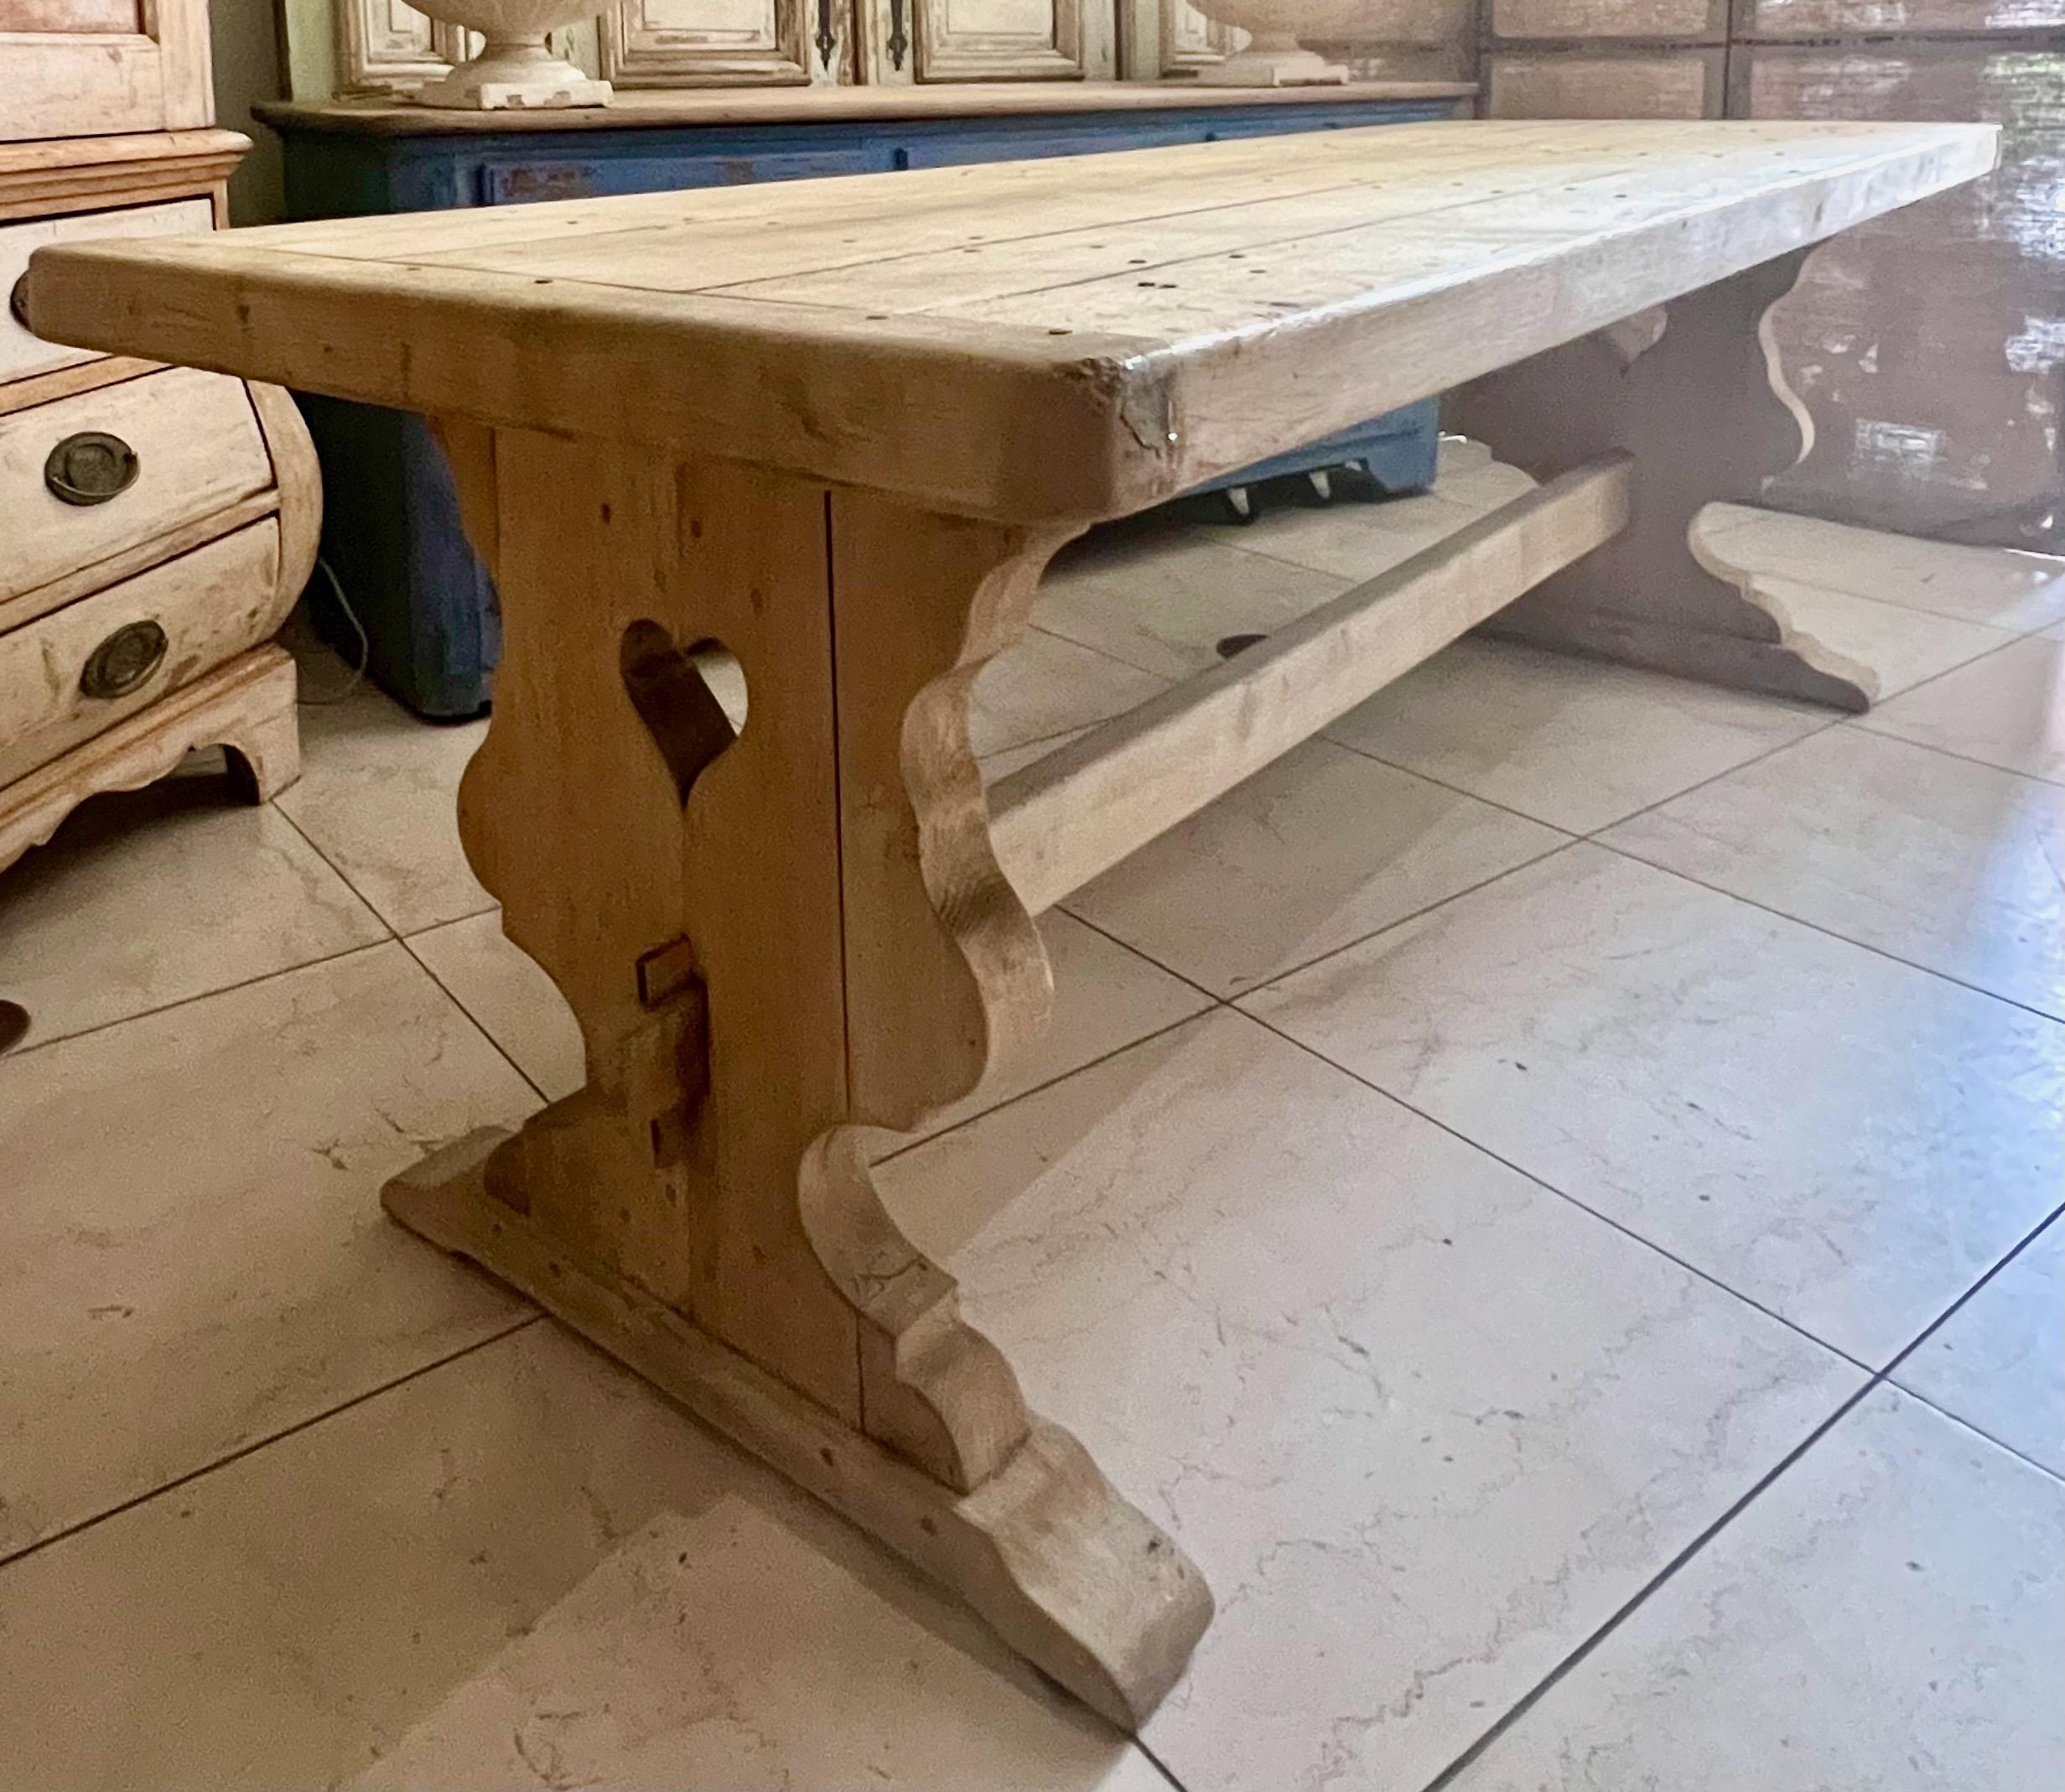 Late 19th/early 20th century French, grand scale solid oak Monastery style table.
Sturdily constructed from solid blonde oak with trestle, mortise and tenon joinery base holding very thick solid plank top.
Top, ends bases and stretcher can take